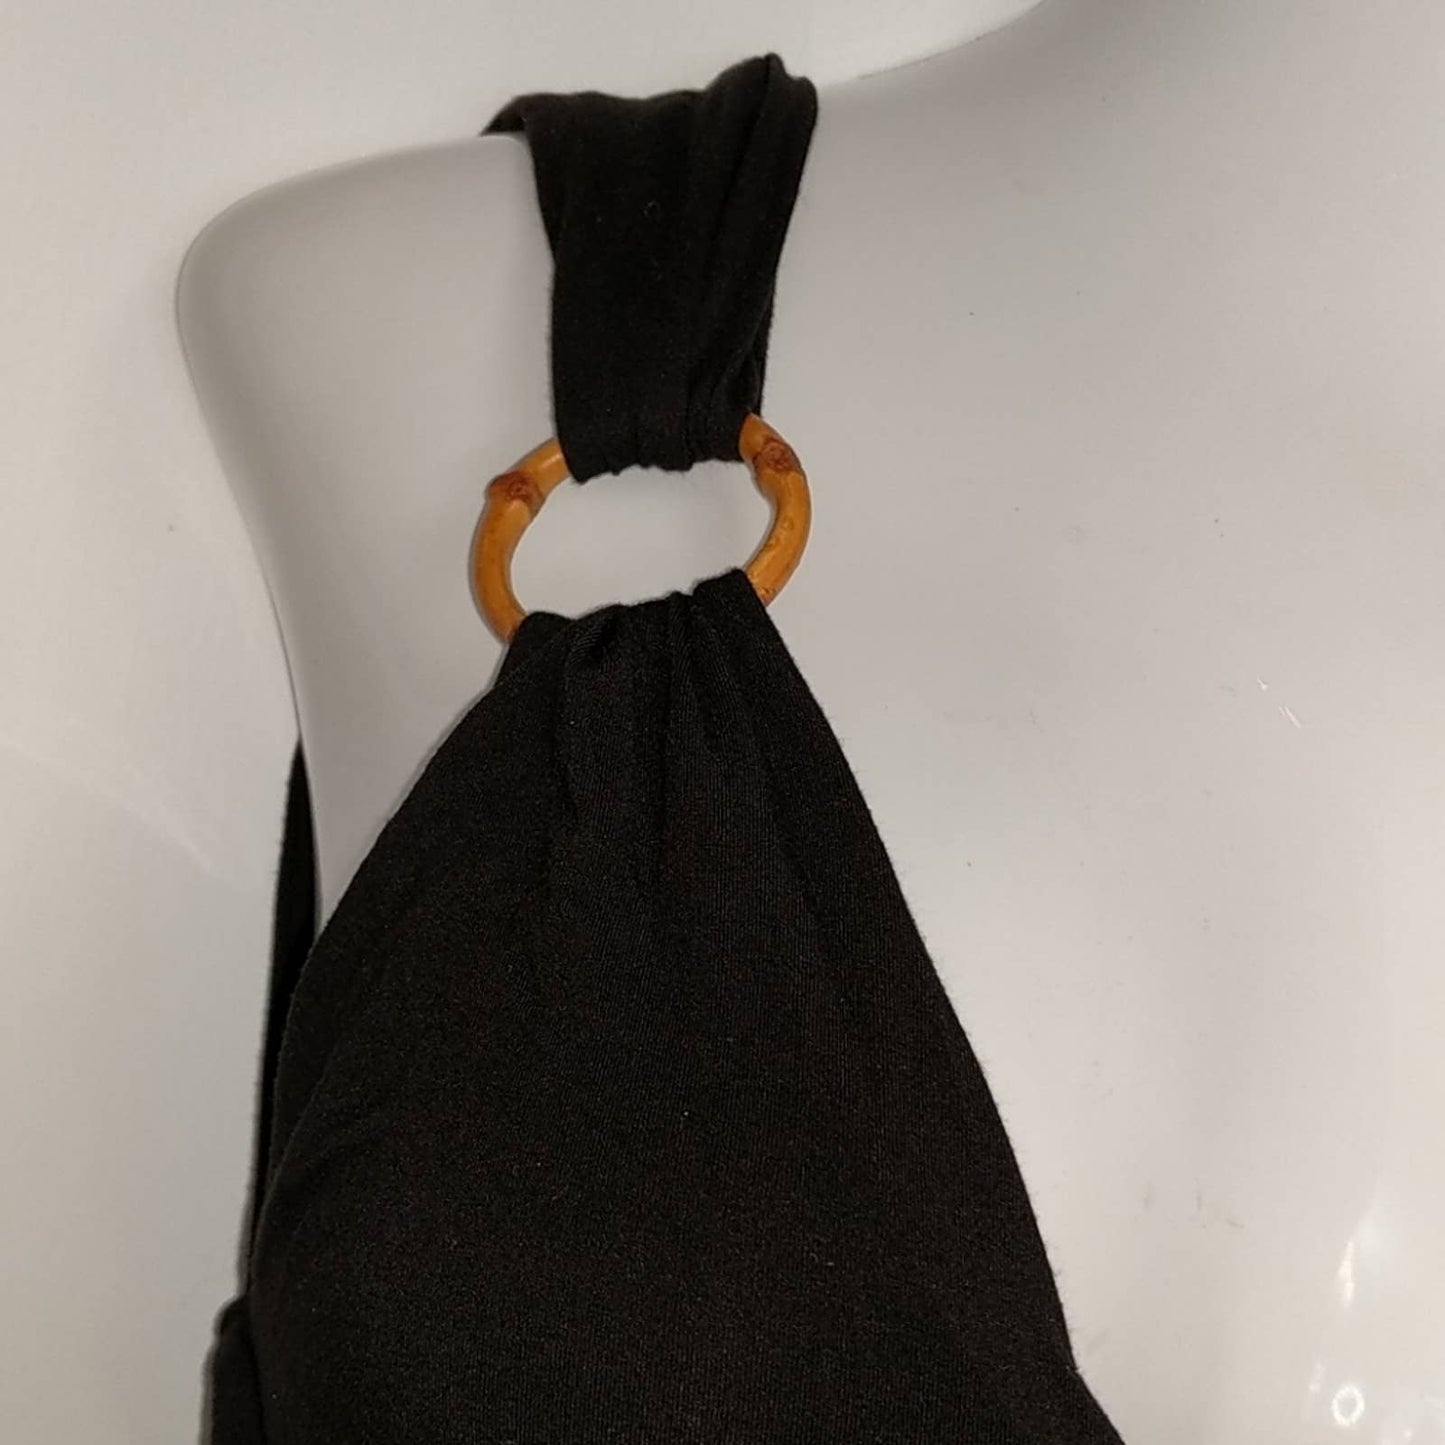 VICTORIA'S SECRET Black Plunge Sundress with Gold Rings Small